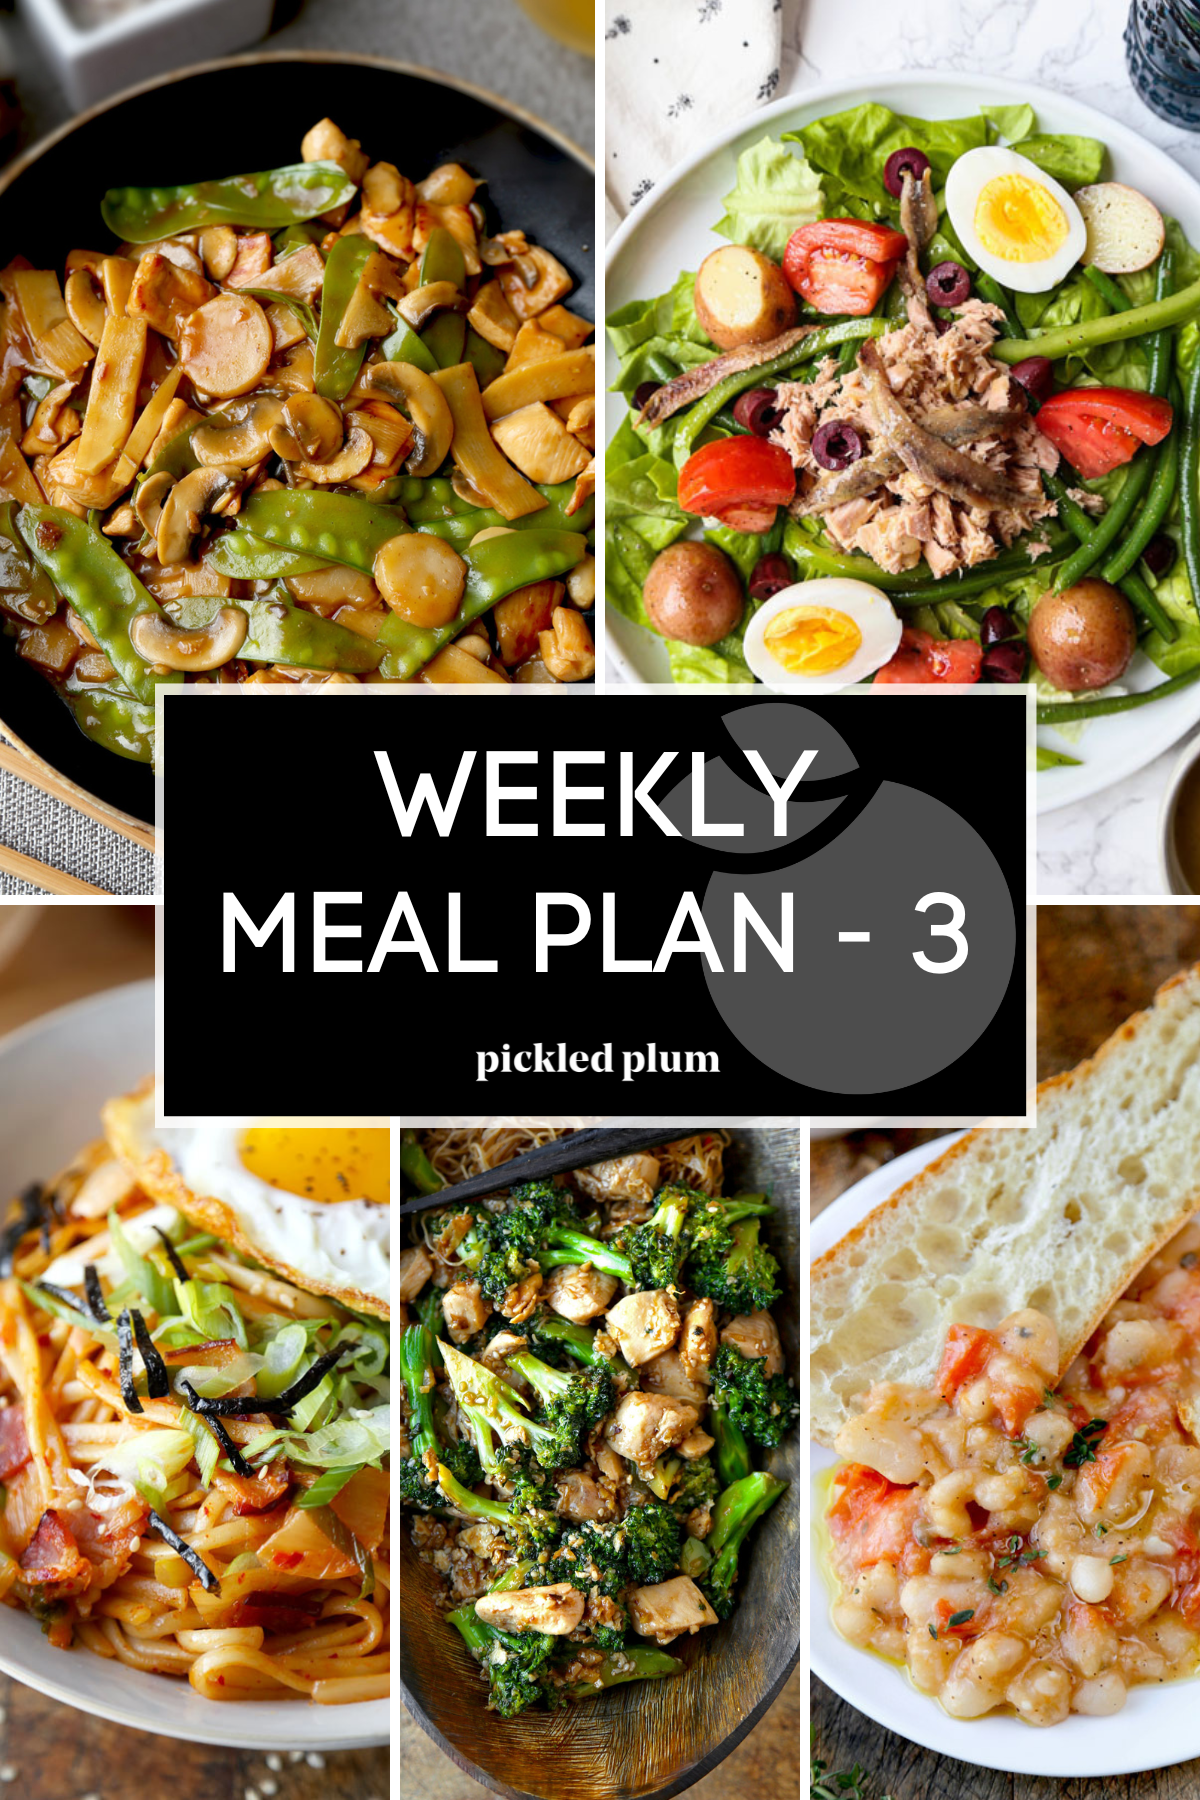 Weekly meal plan - 3 salads and stir fries